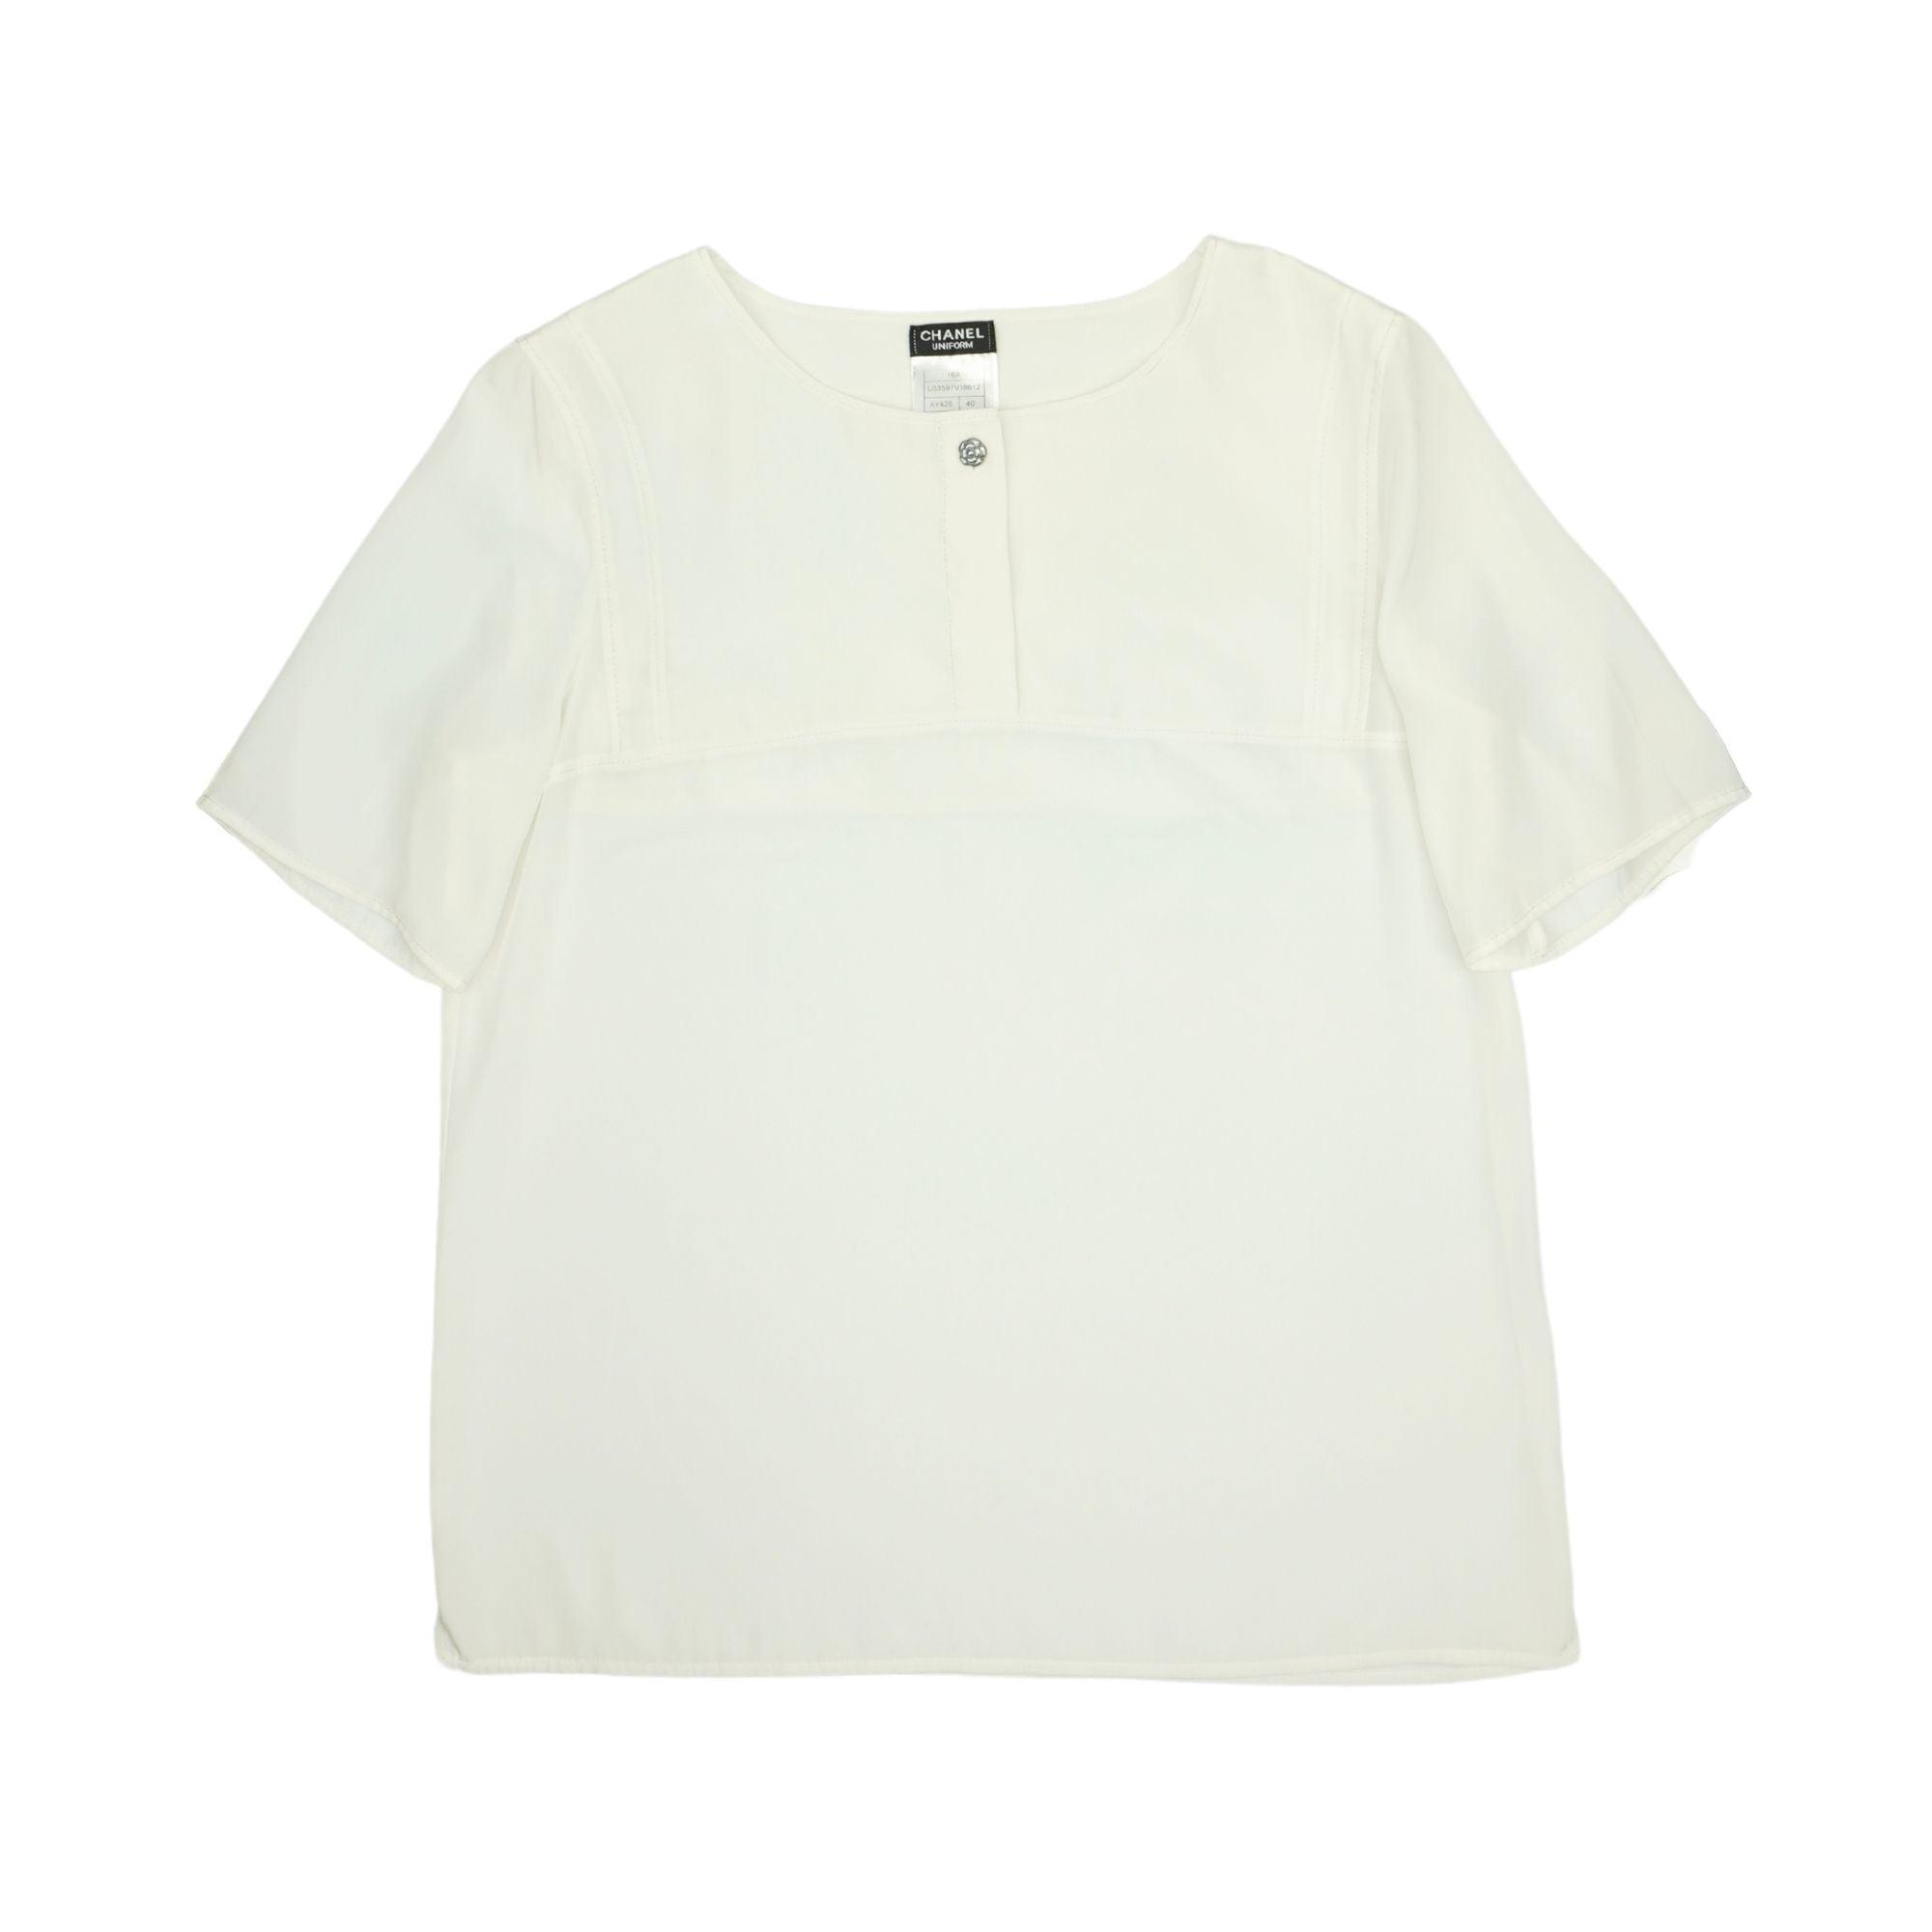 Chanel Uniform Top - Women's 40 - Fashionably Yours